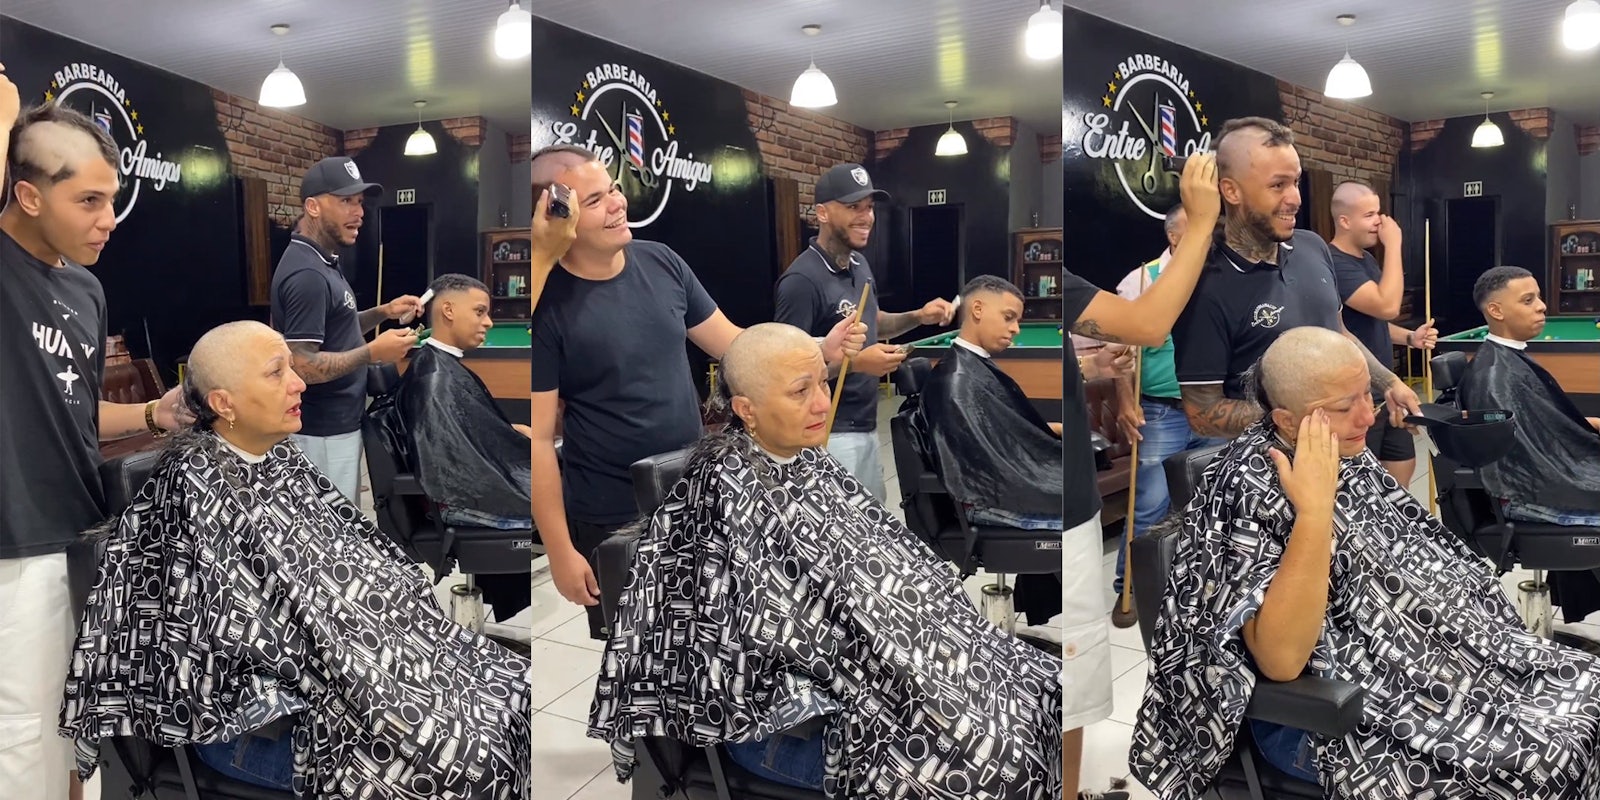 Barber shaving woman's hair due to chemo, decides to cut his own and his coworkers join him